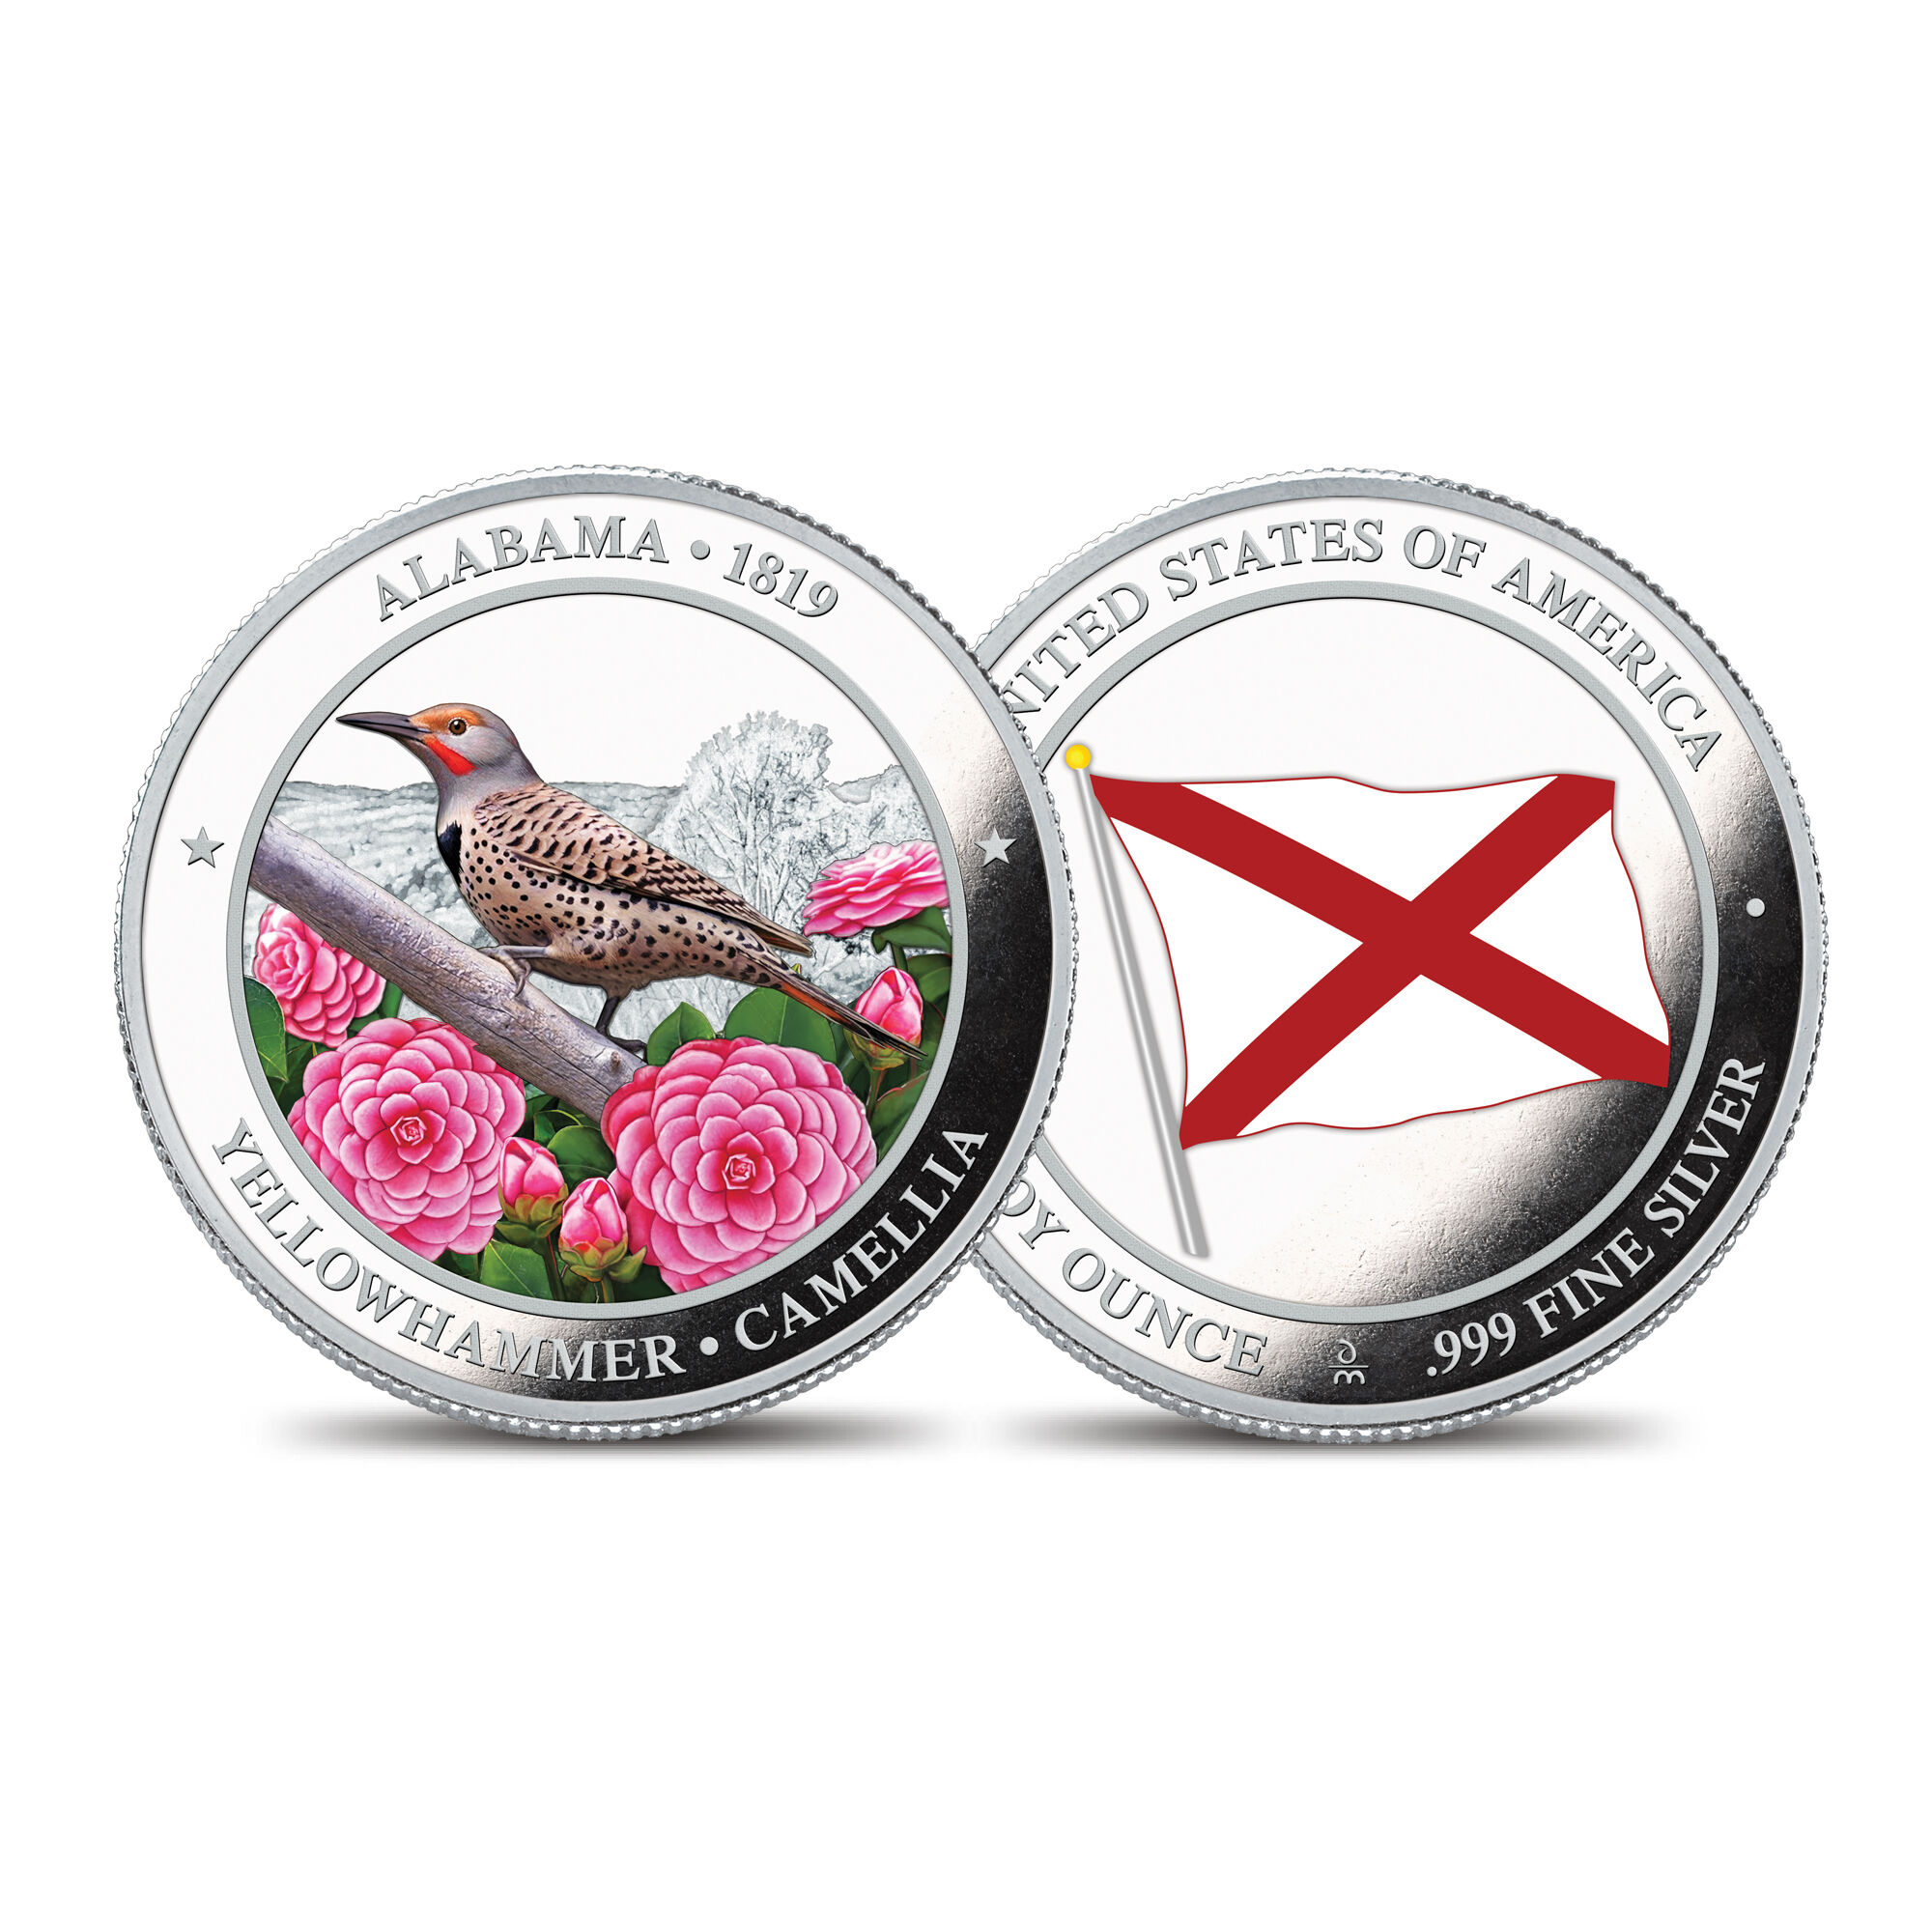 The State Bird and Flower Silver Commemoratives 2167 0088 a commemorativeAL